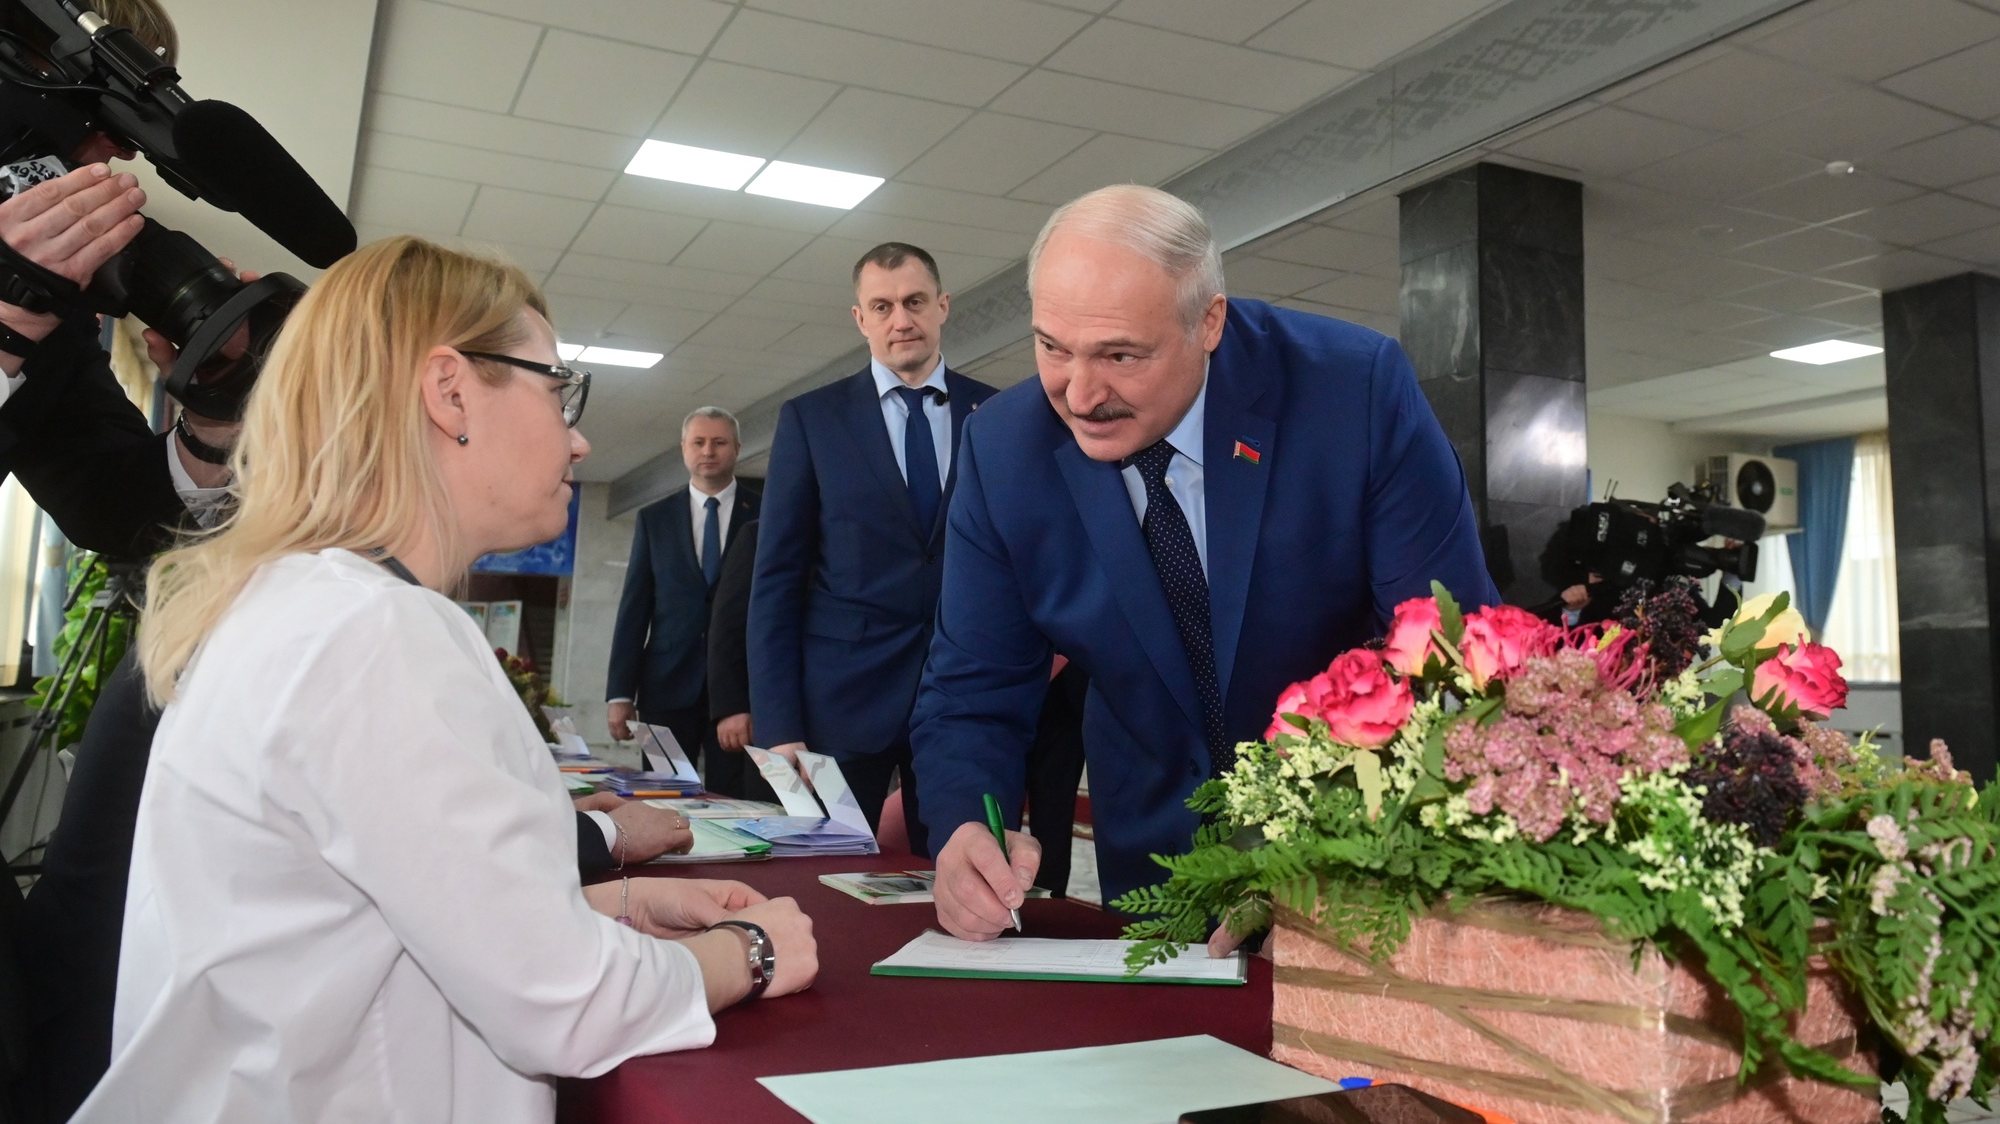 epa09789234 A handout picture made available by Belarus President Press-service shows Belarusian President Aleksandr Lukashenko (R) votes during referendum on constitutional amendments in Minsk, Belarus, 27 February 2022. A total of 5,510 polling stations are open across the country for over 6.8 million registered voters.The Belarusian Central Elections Commission (CEC) has said that it has found the referendum on constitutional amendments to be successful.  EPA/BELARUS PRESIDENT PRESS-SERVICE /HANDOUT HANDOUT HANDOUT EDITORIAL USE ONLY/NO SALES HANDOUT EDITORIAL USE ONLY/NO SALES